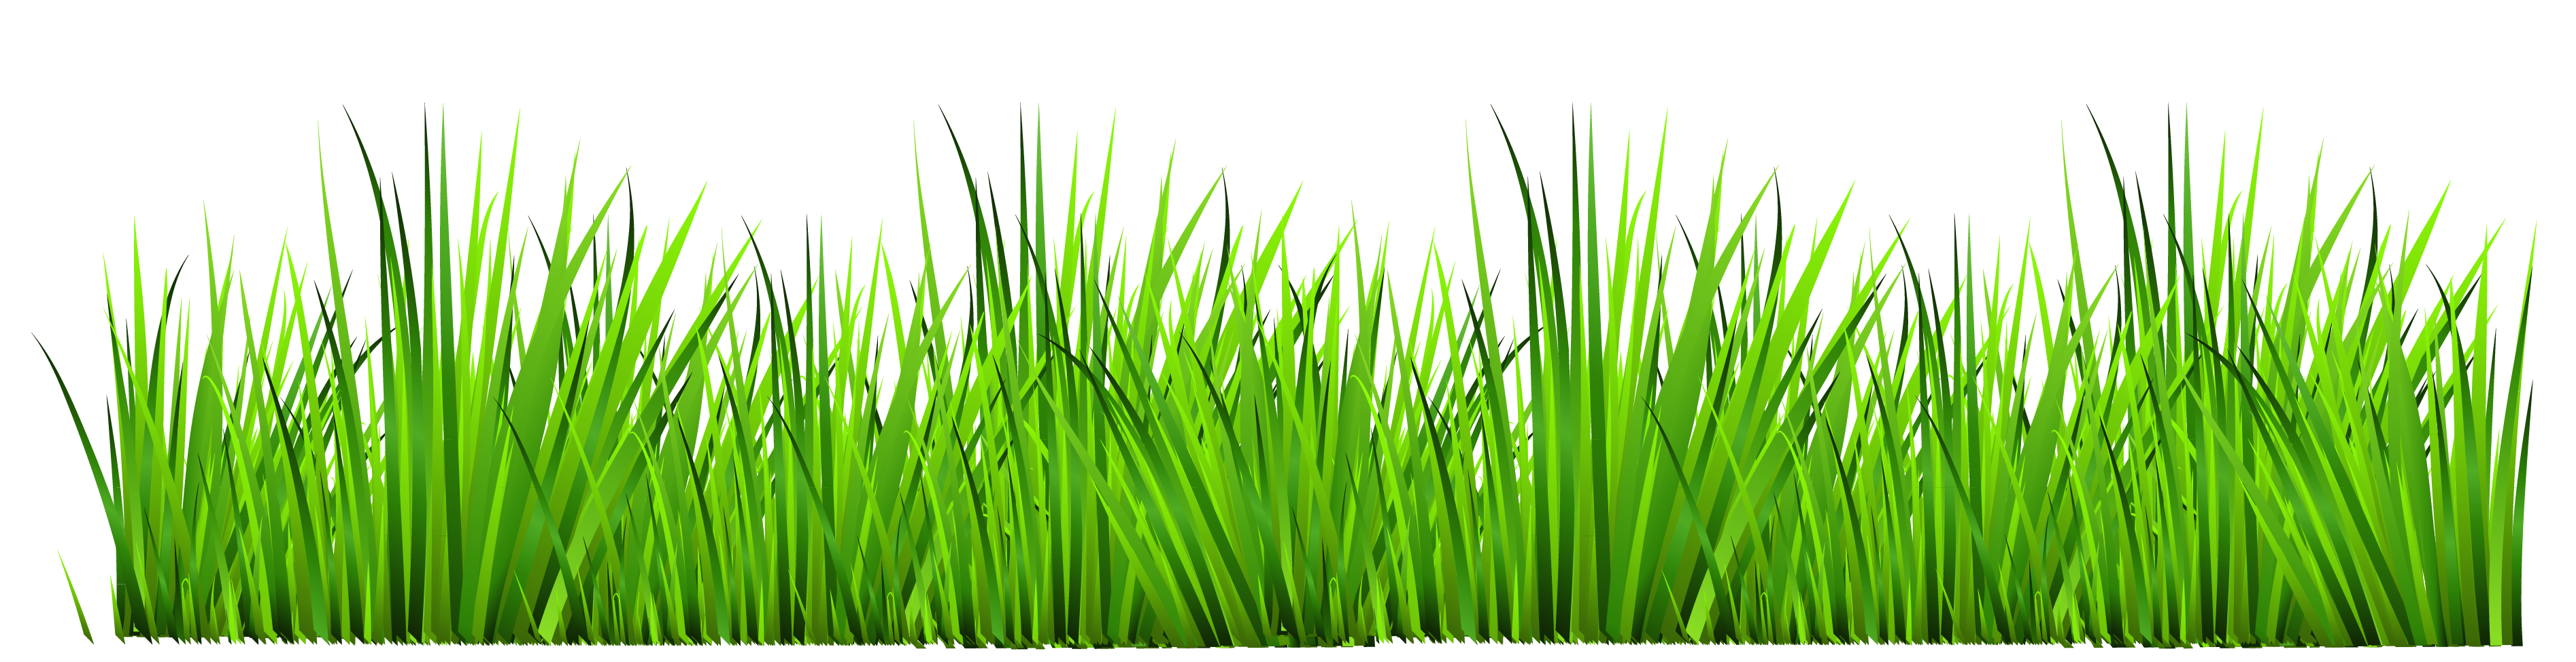 Poppy clipart grassy. Free grass cliparts download